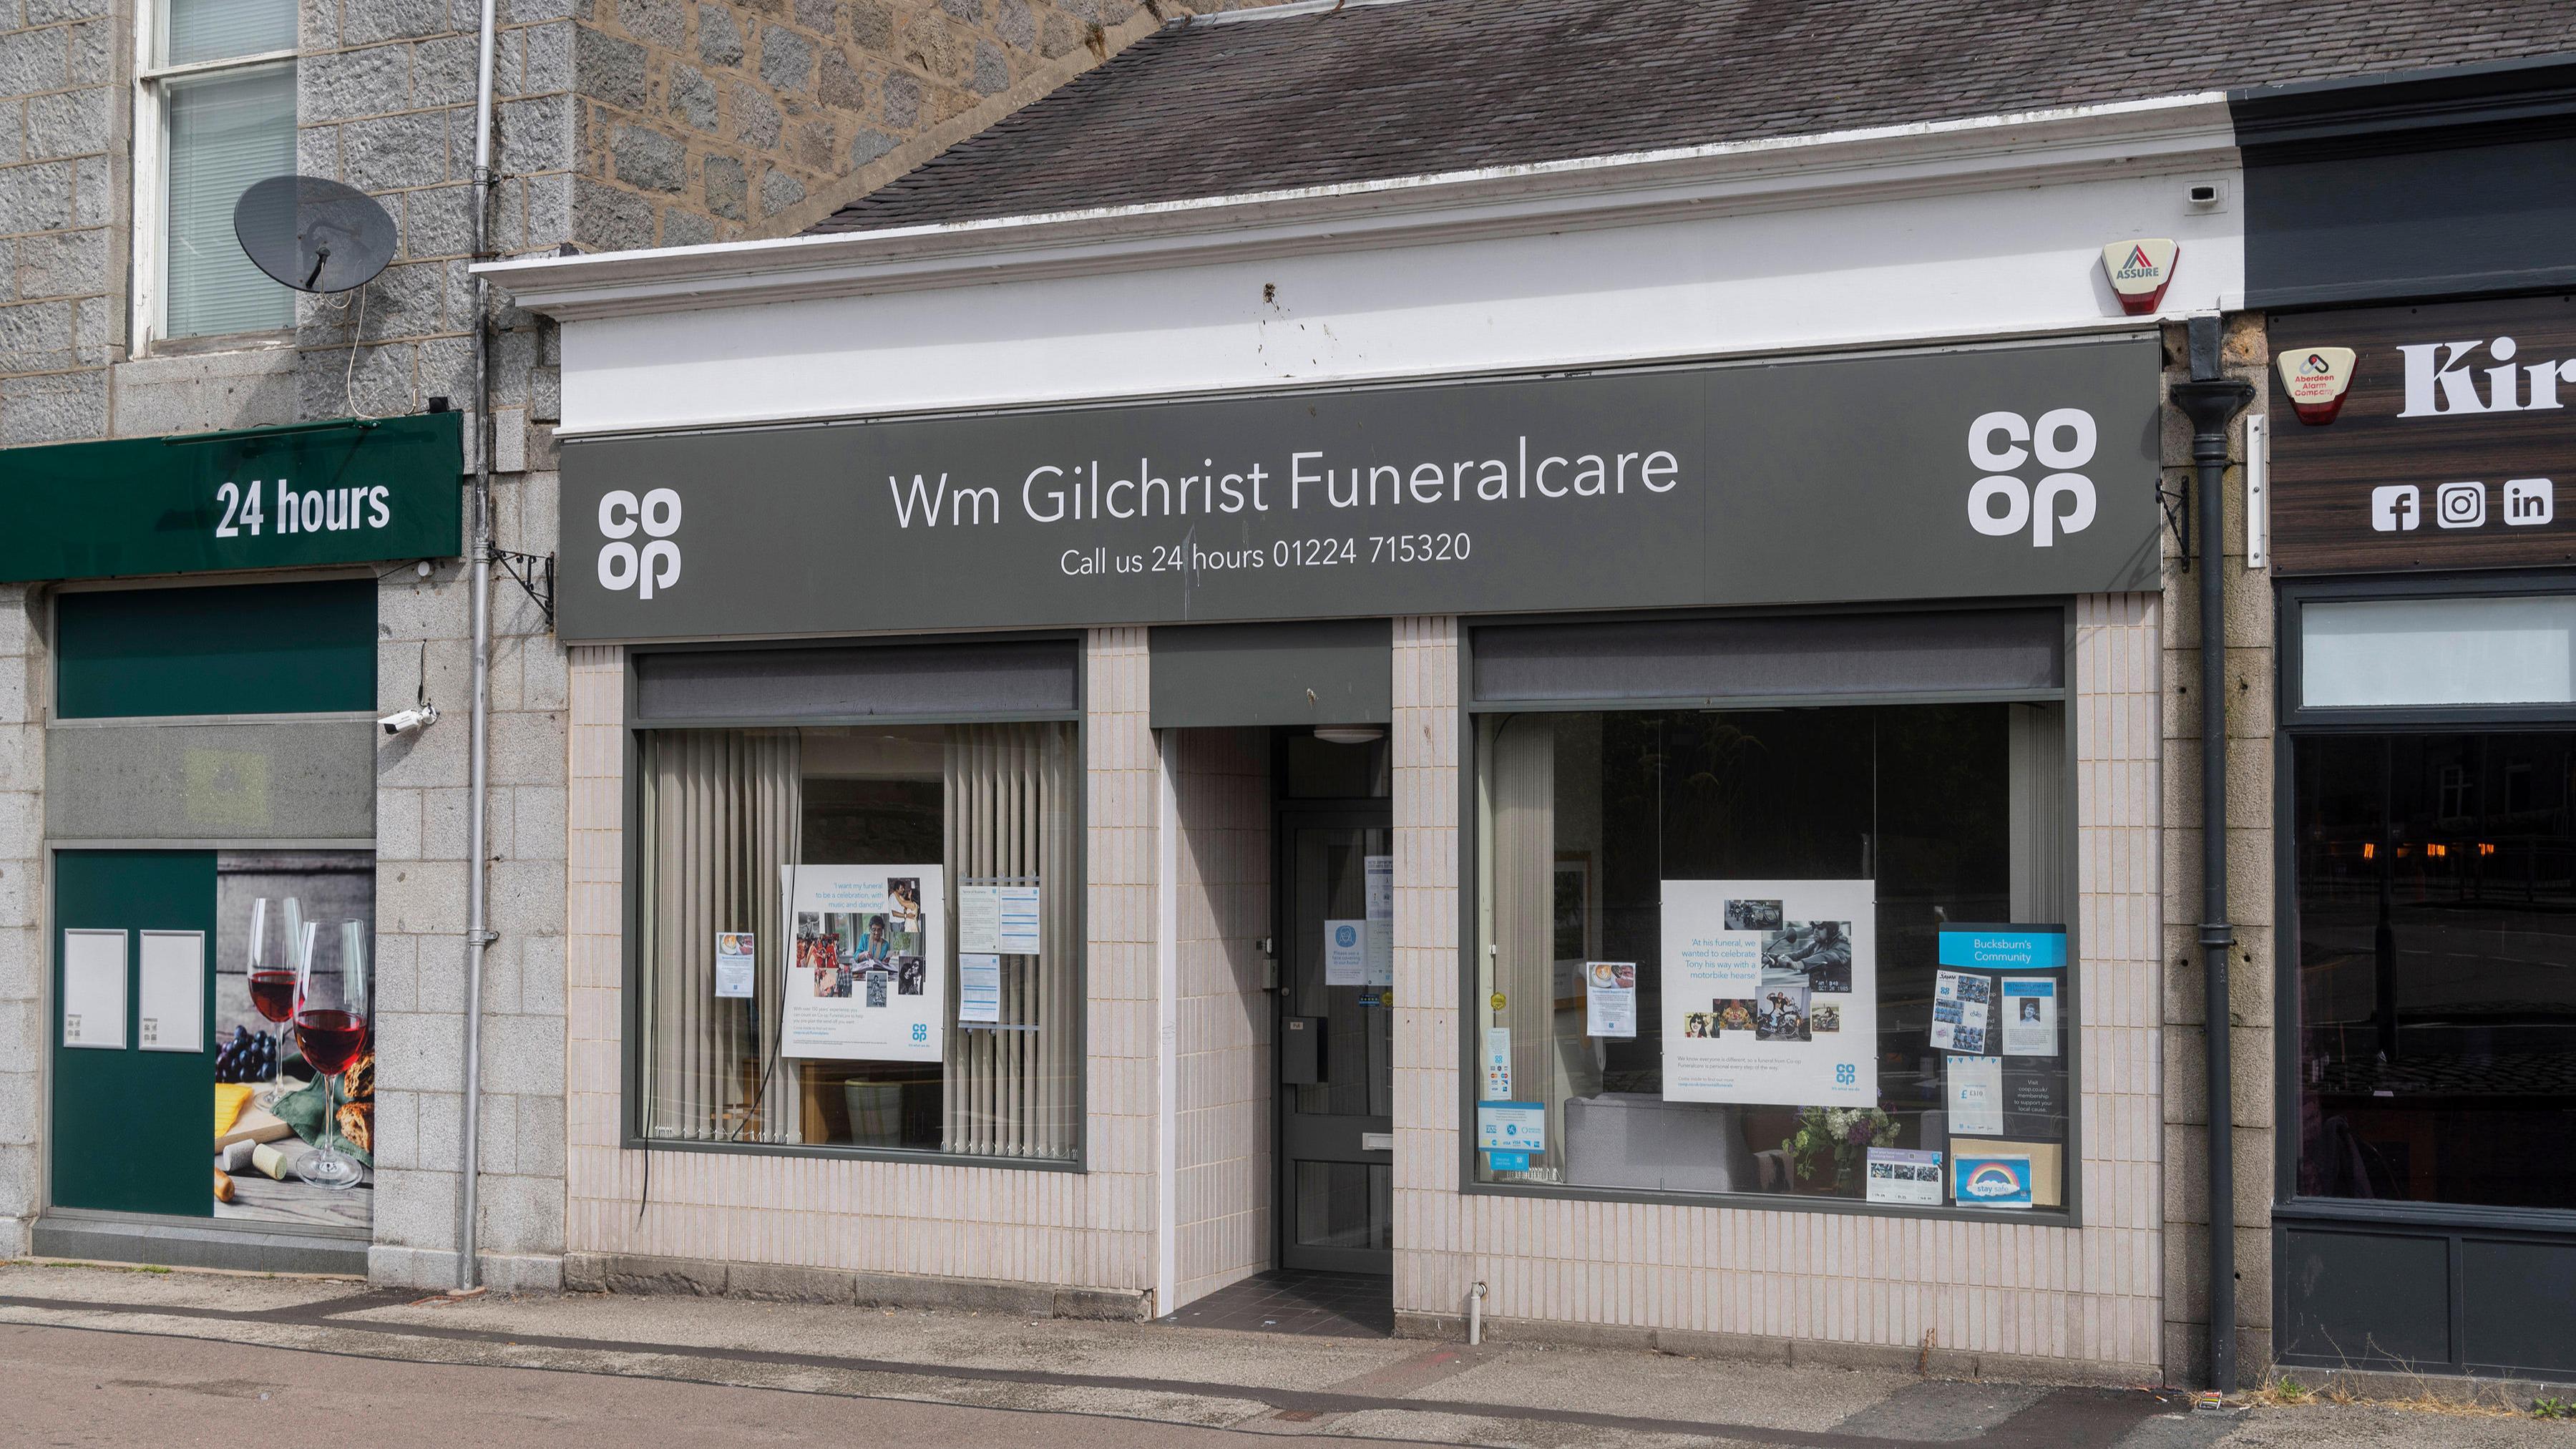 Images Wm Gilchrist Funeralcare